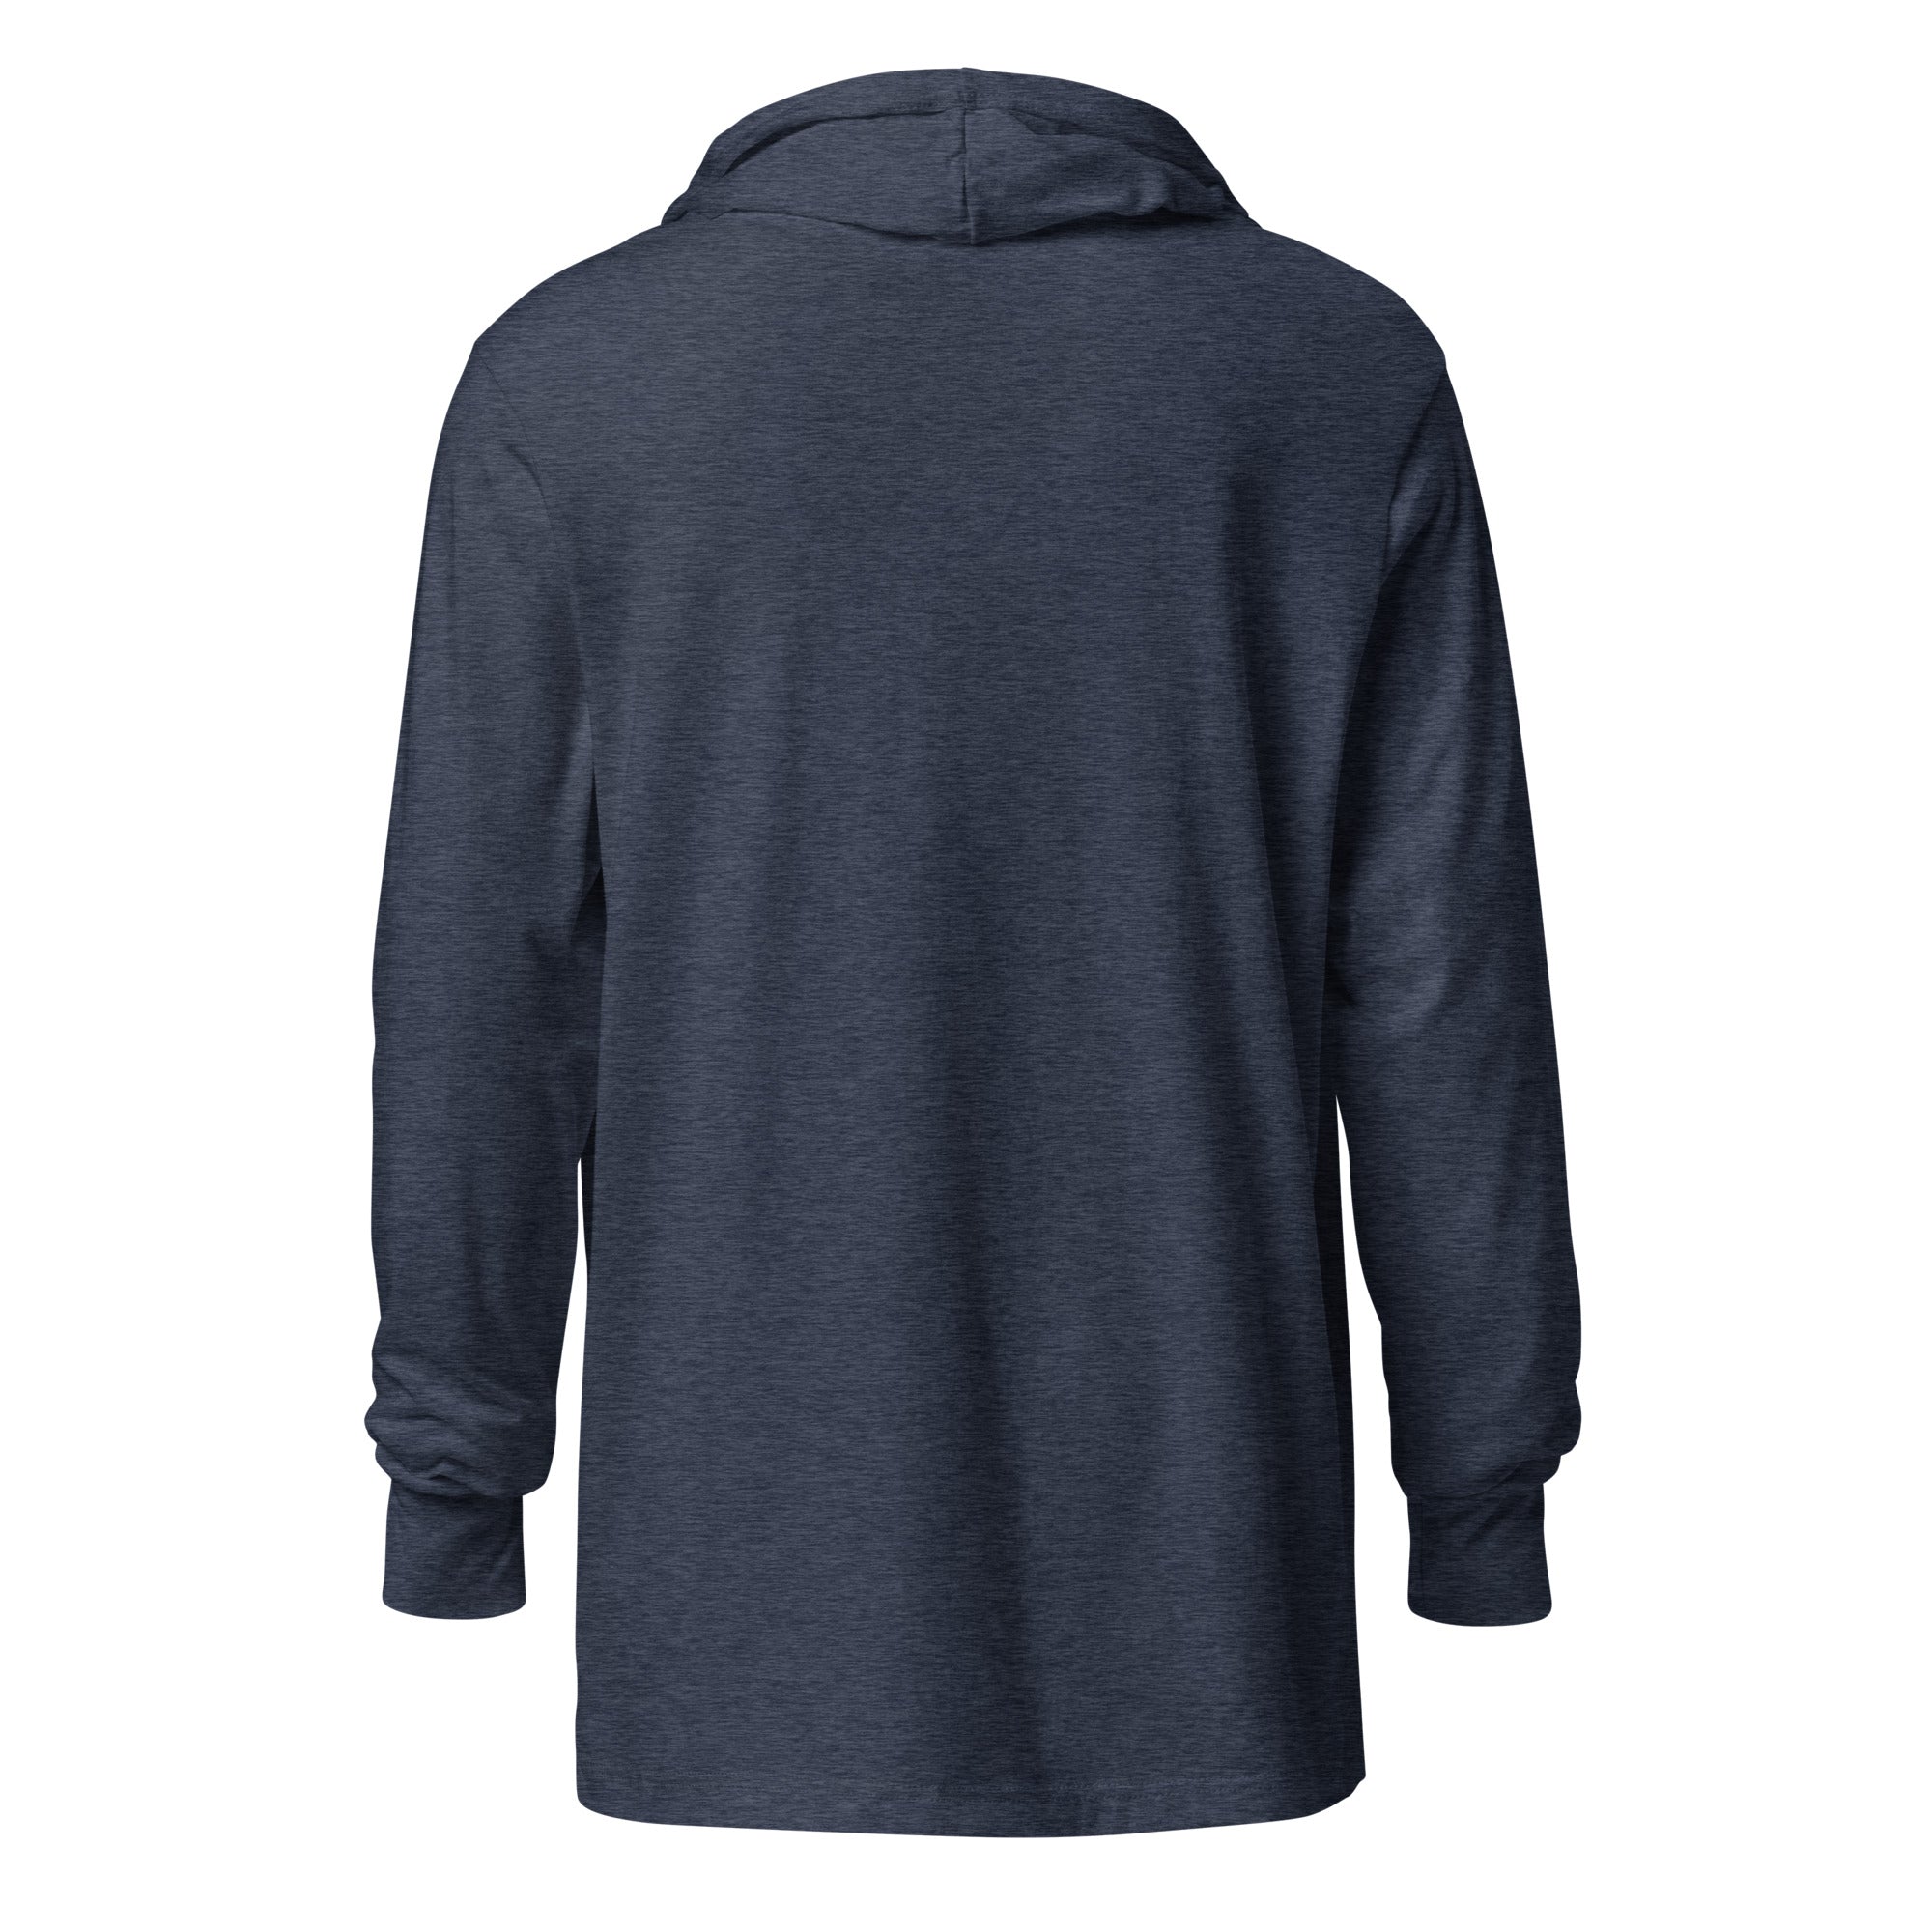 We Are the Carbon They Want To Reduce Hooded Long-Sleeve Tee